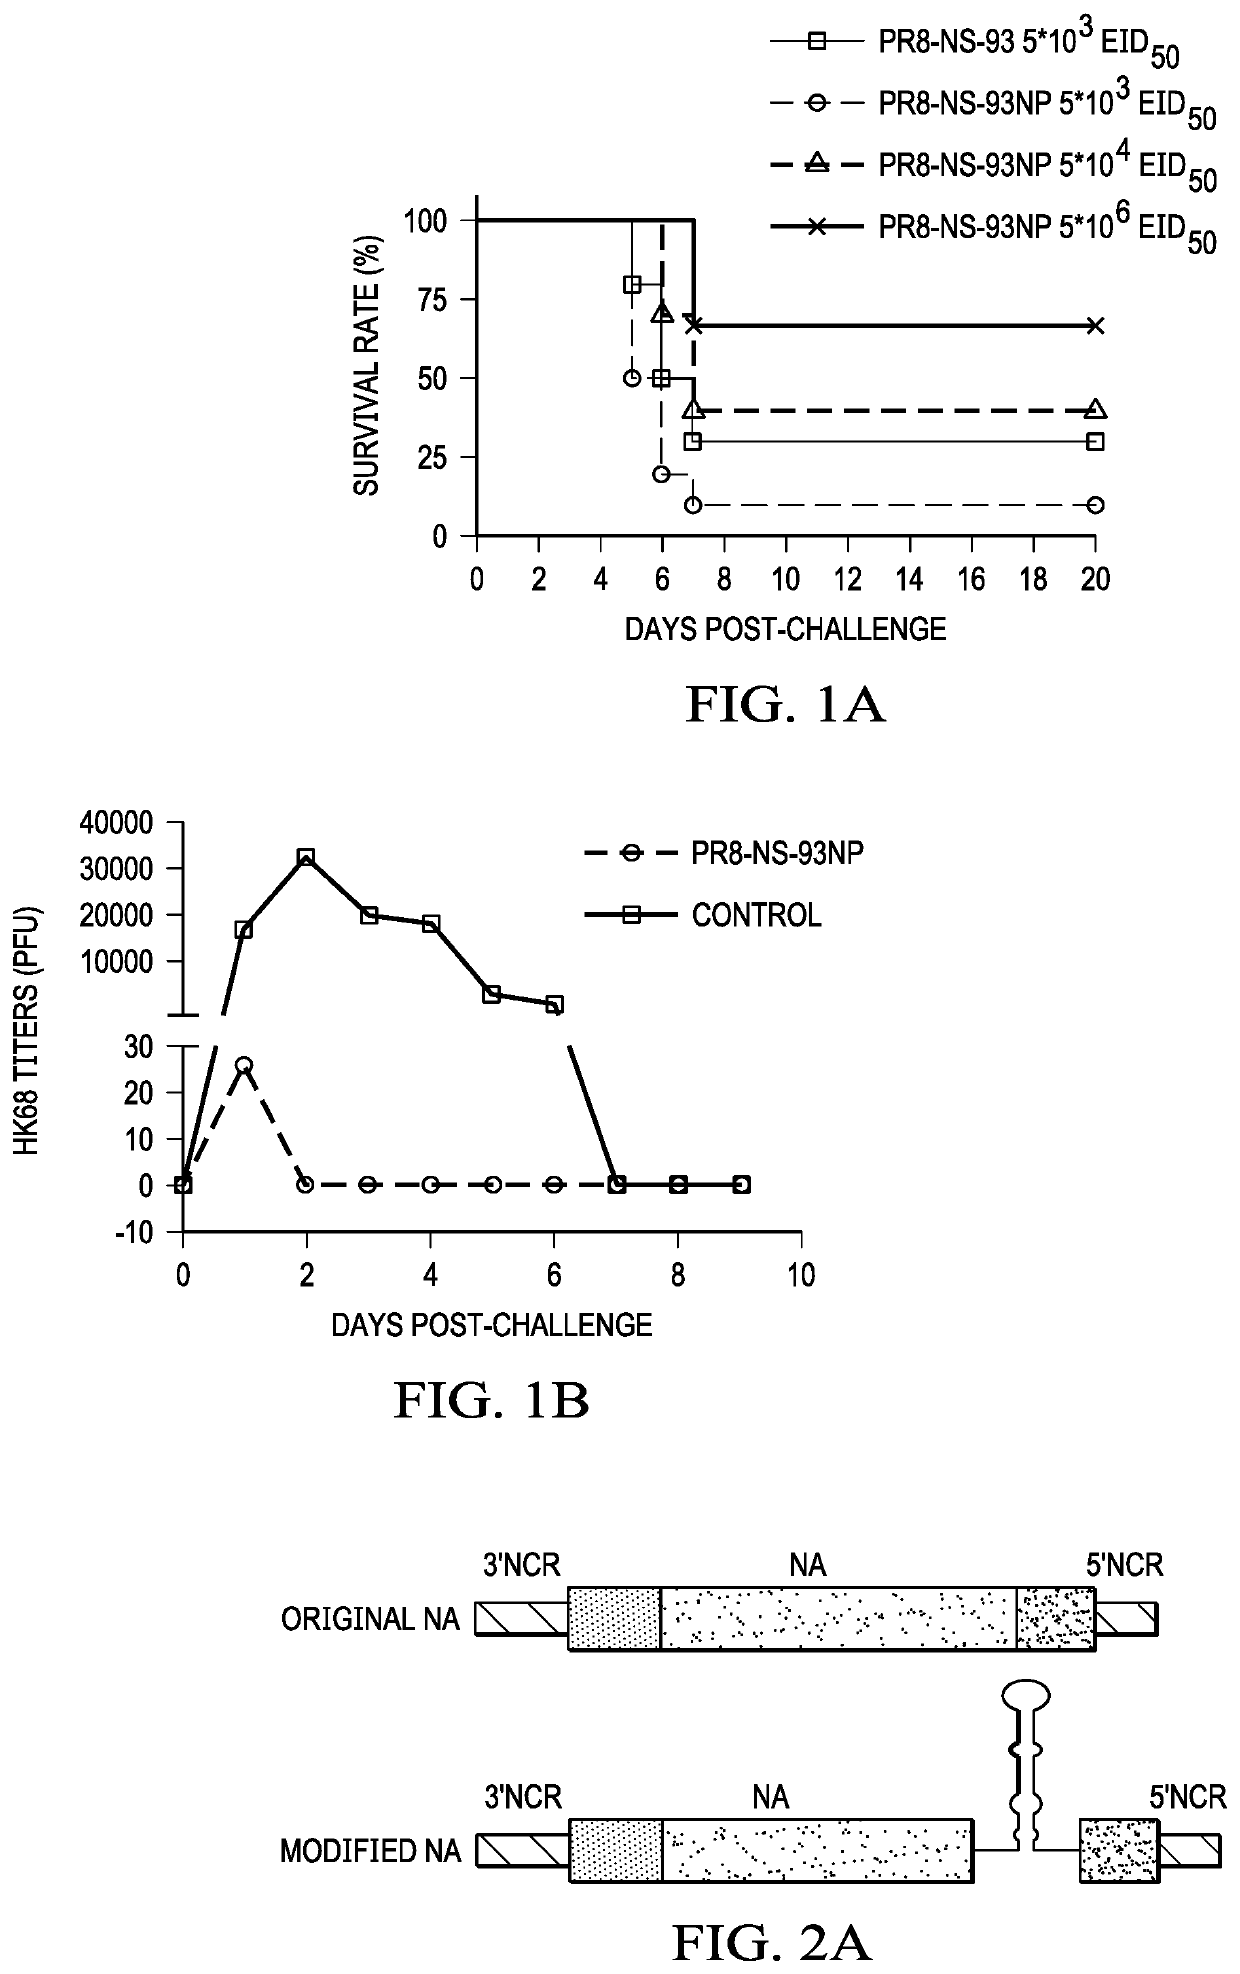 Self-attenuated prophylactic and therapeutic vaccines against pathogens